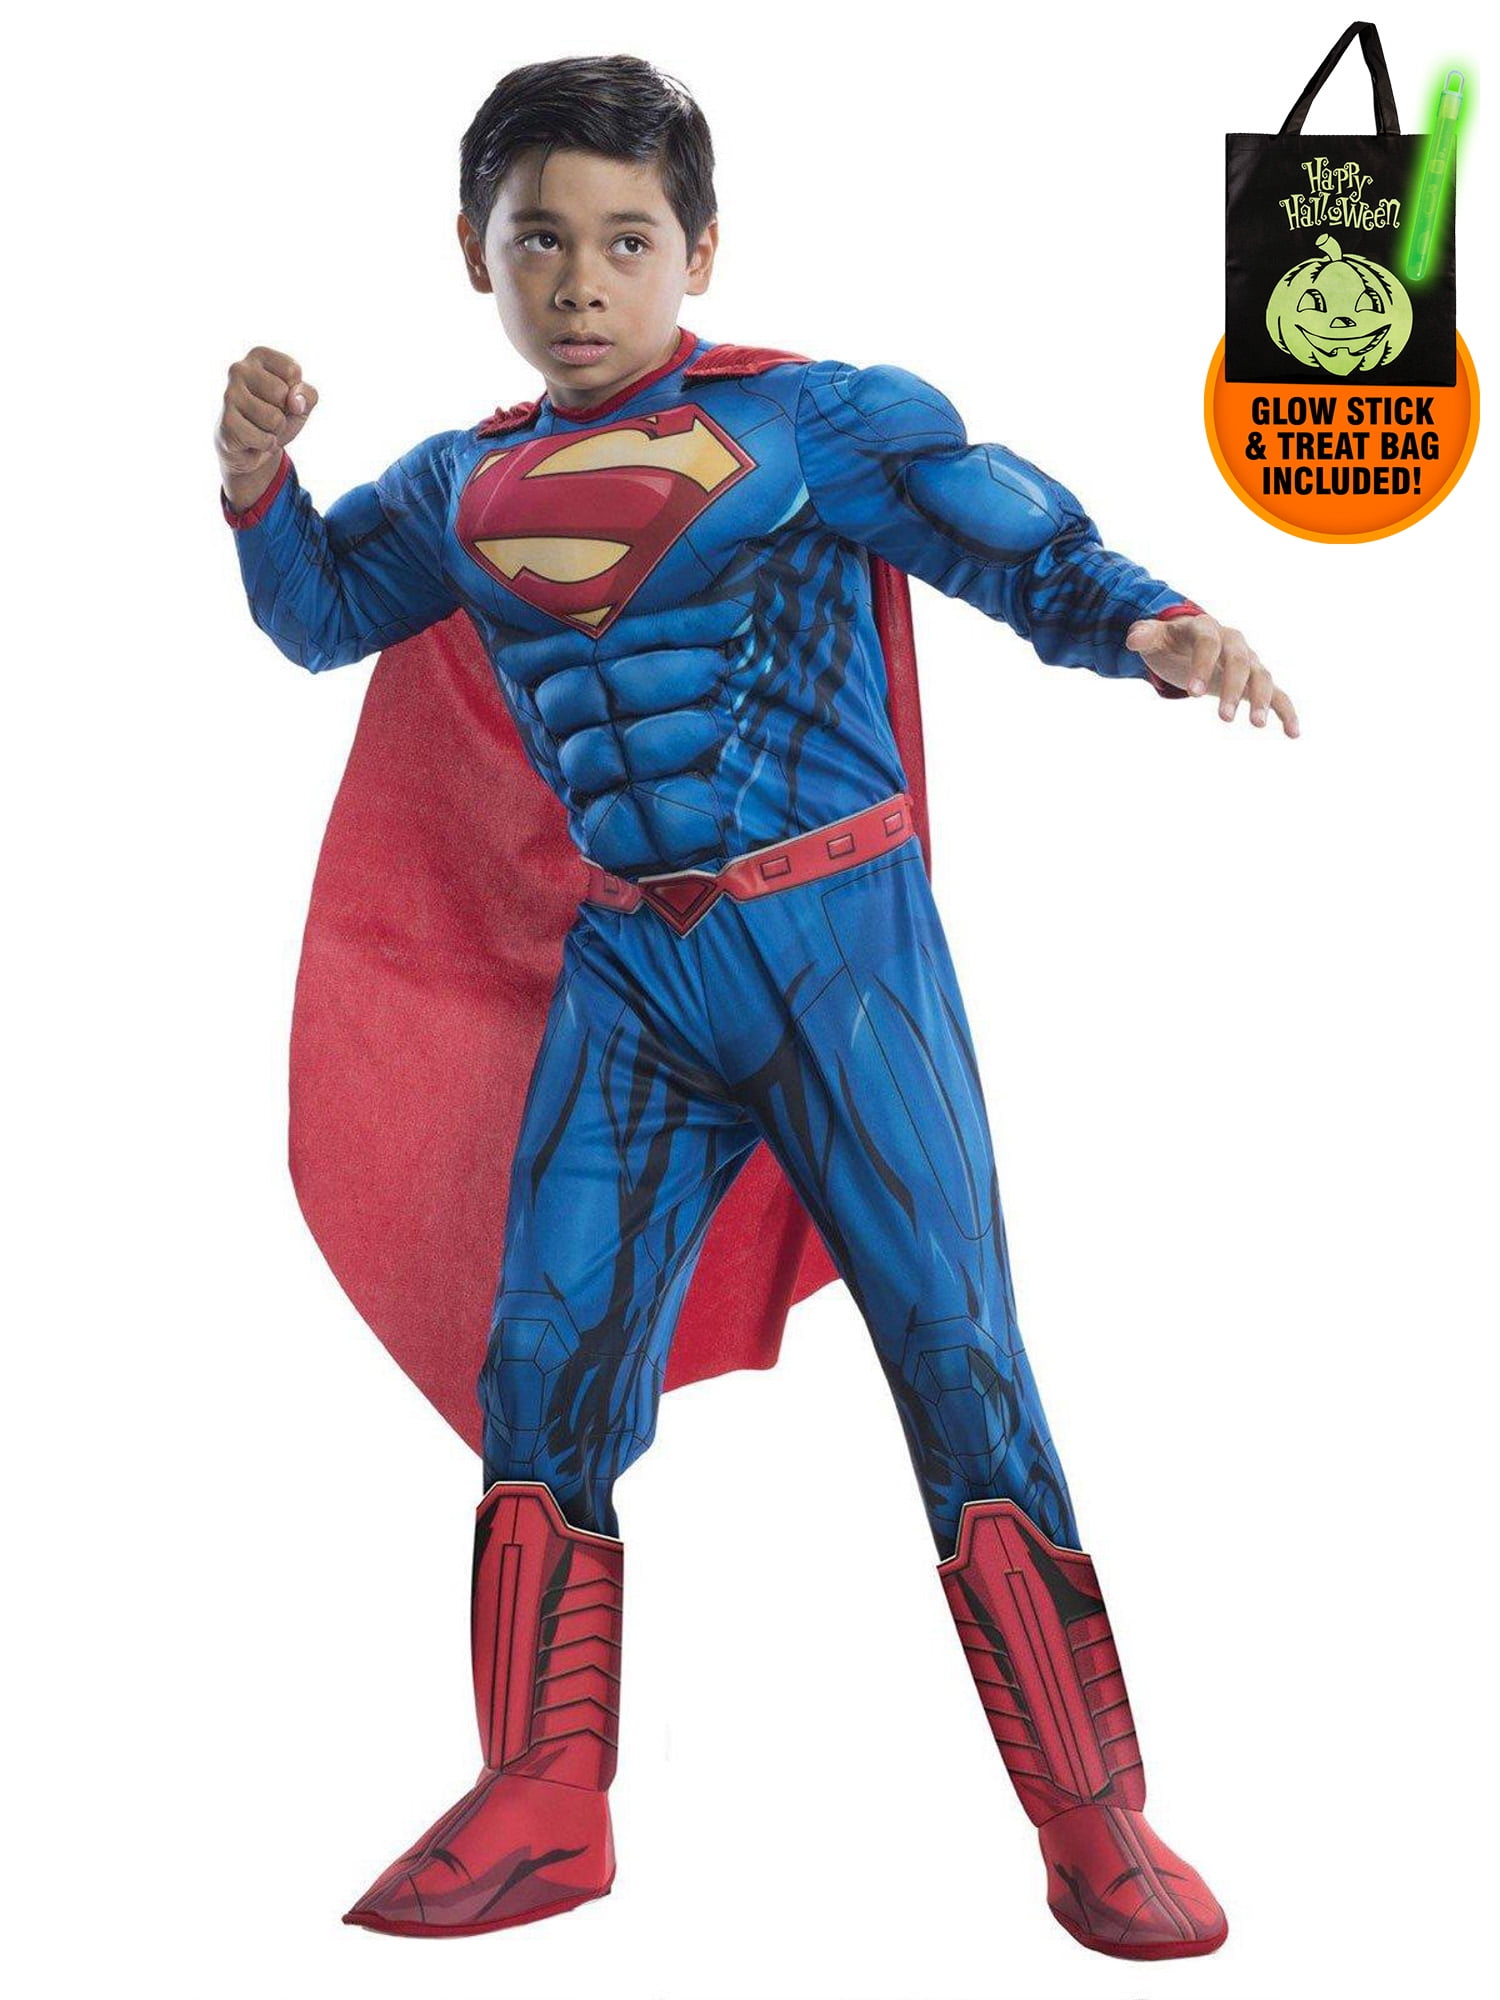 Deluxe Superman Costume For Kids Treat Safety Kit-M - Walmart.com ...